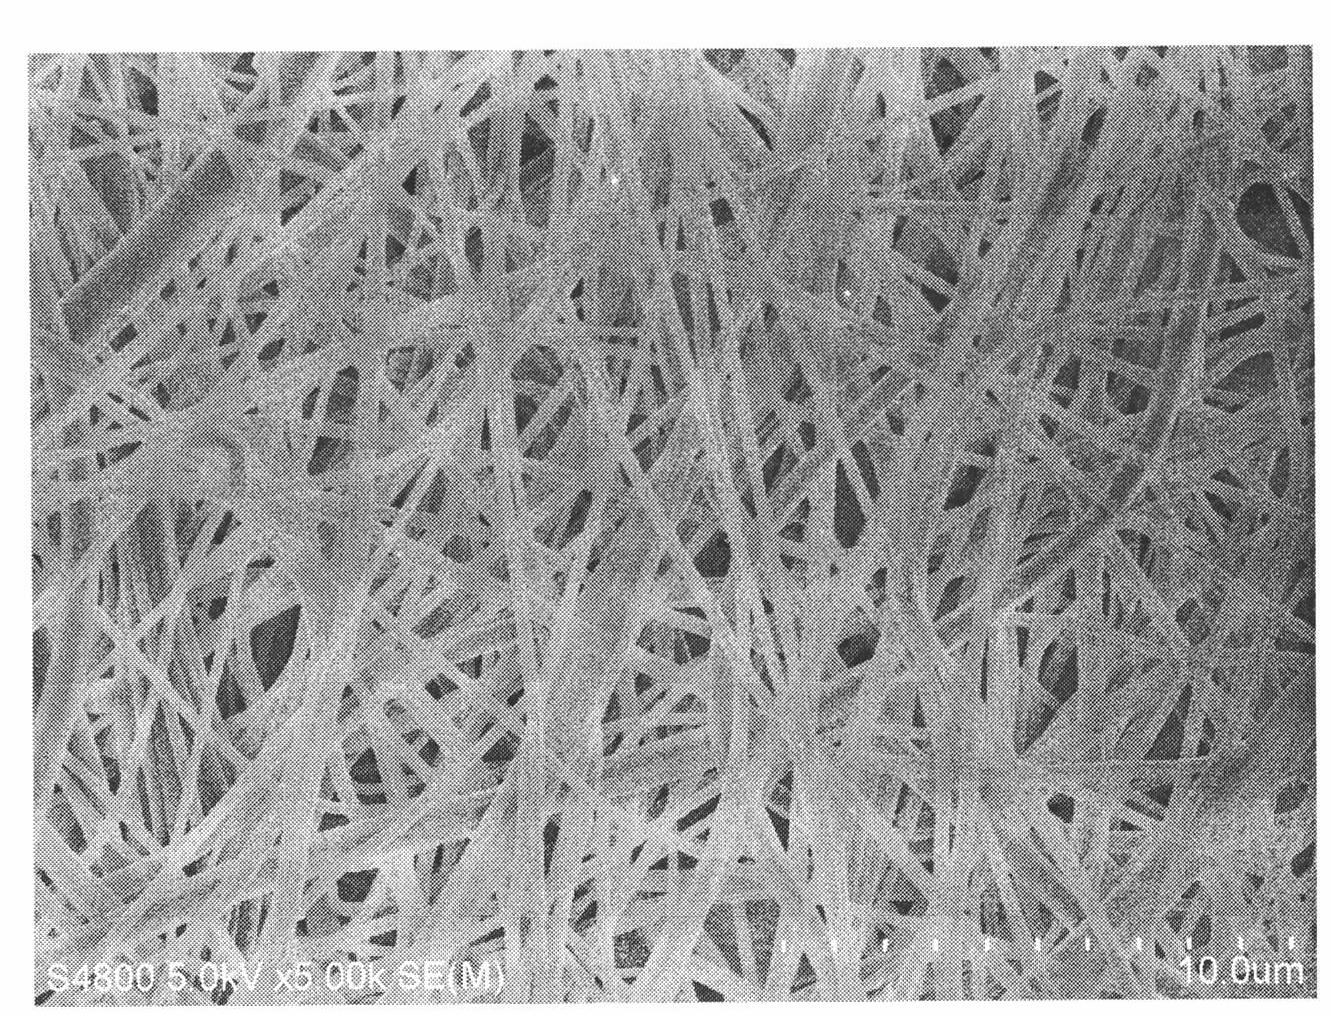 Catalase immobilization method on basis of using amidoxime PAN nanofibrous membrane as carrier